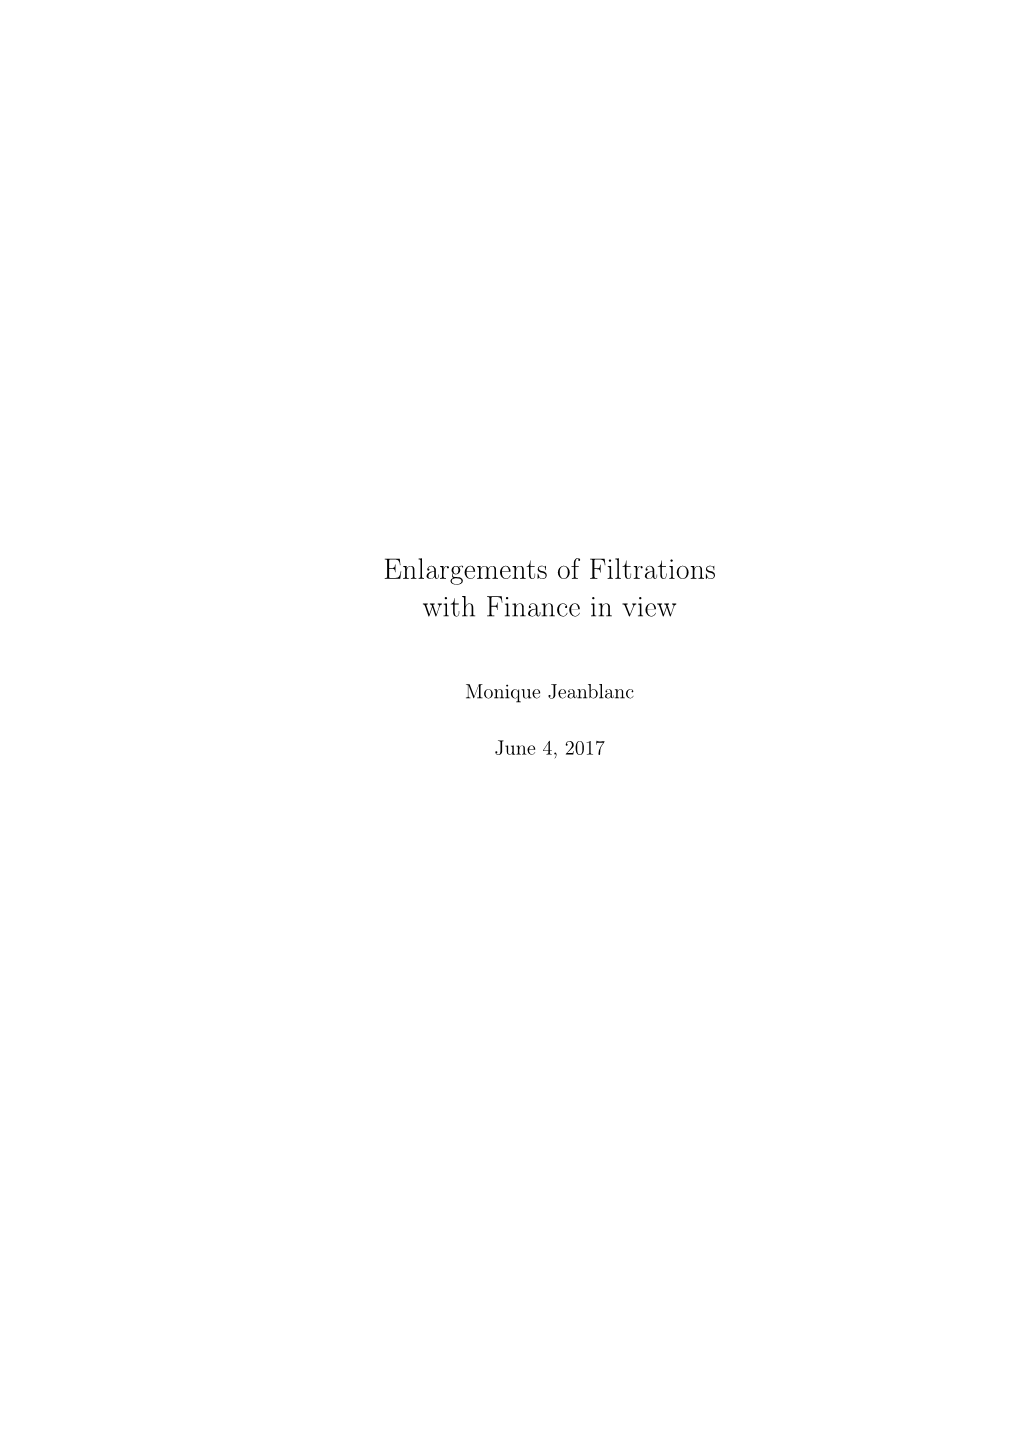 Enlargements of Filtrations with Finance in View